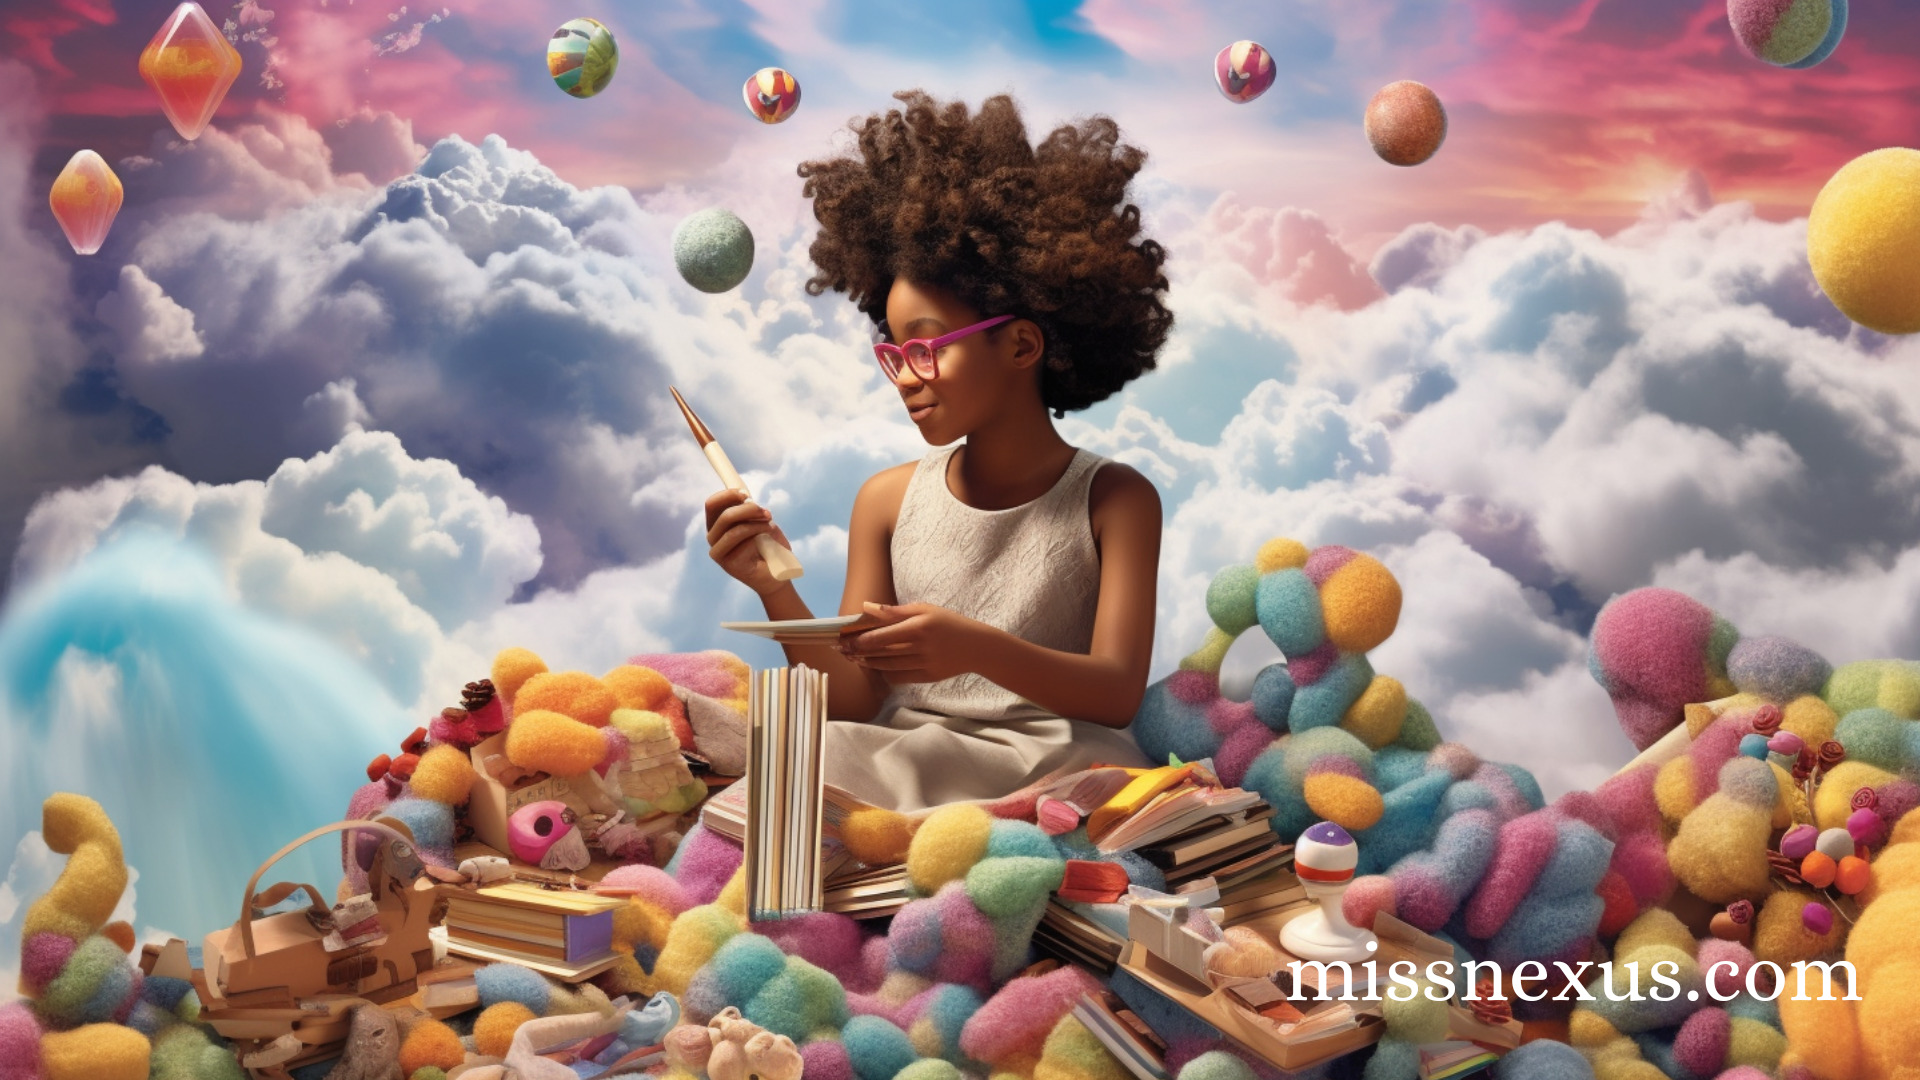 In this vibrant and enchanting scene, a realistic image of a young Black girl is joyfully engaged in play. She sits amidst a backdrop of ethereal clouds, her eyes sparkling with wonder and imagination. With her small hands, she delicately builds and rearranges a colorful assortment of floating magical toys. Each toy piece radiates a brilliant array of hues, casting a captivating glow around her. The girl's face is lit up with a bright smile, capturing the sheer delight and boundless creativity that infuse the air. It's a snapshot of pure childhood magic, where dreams take shape and possibilities are endless.